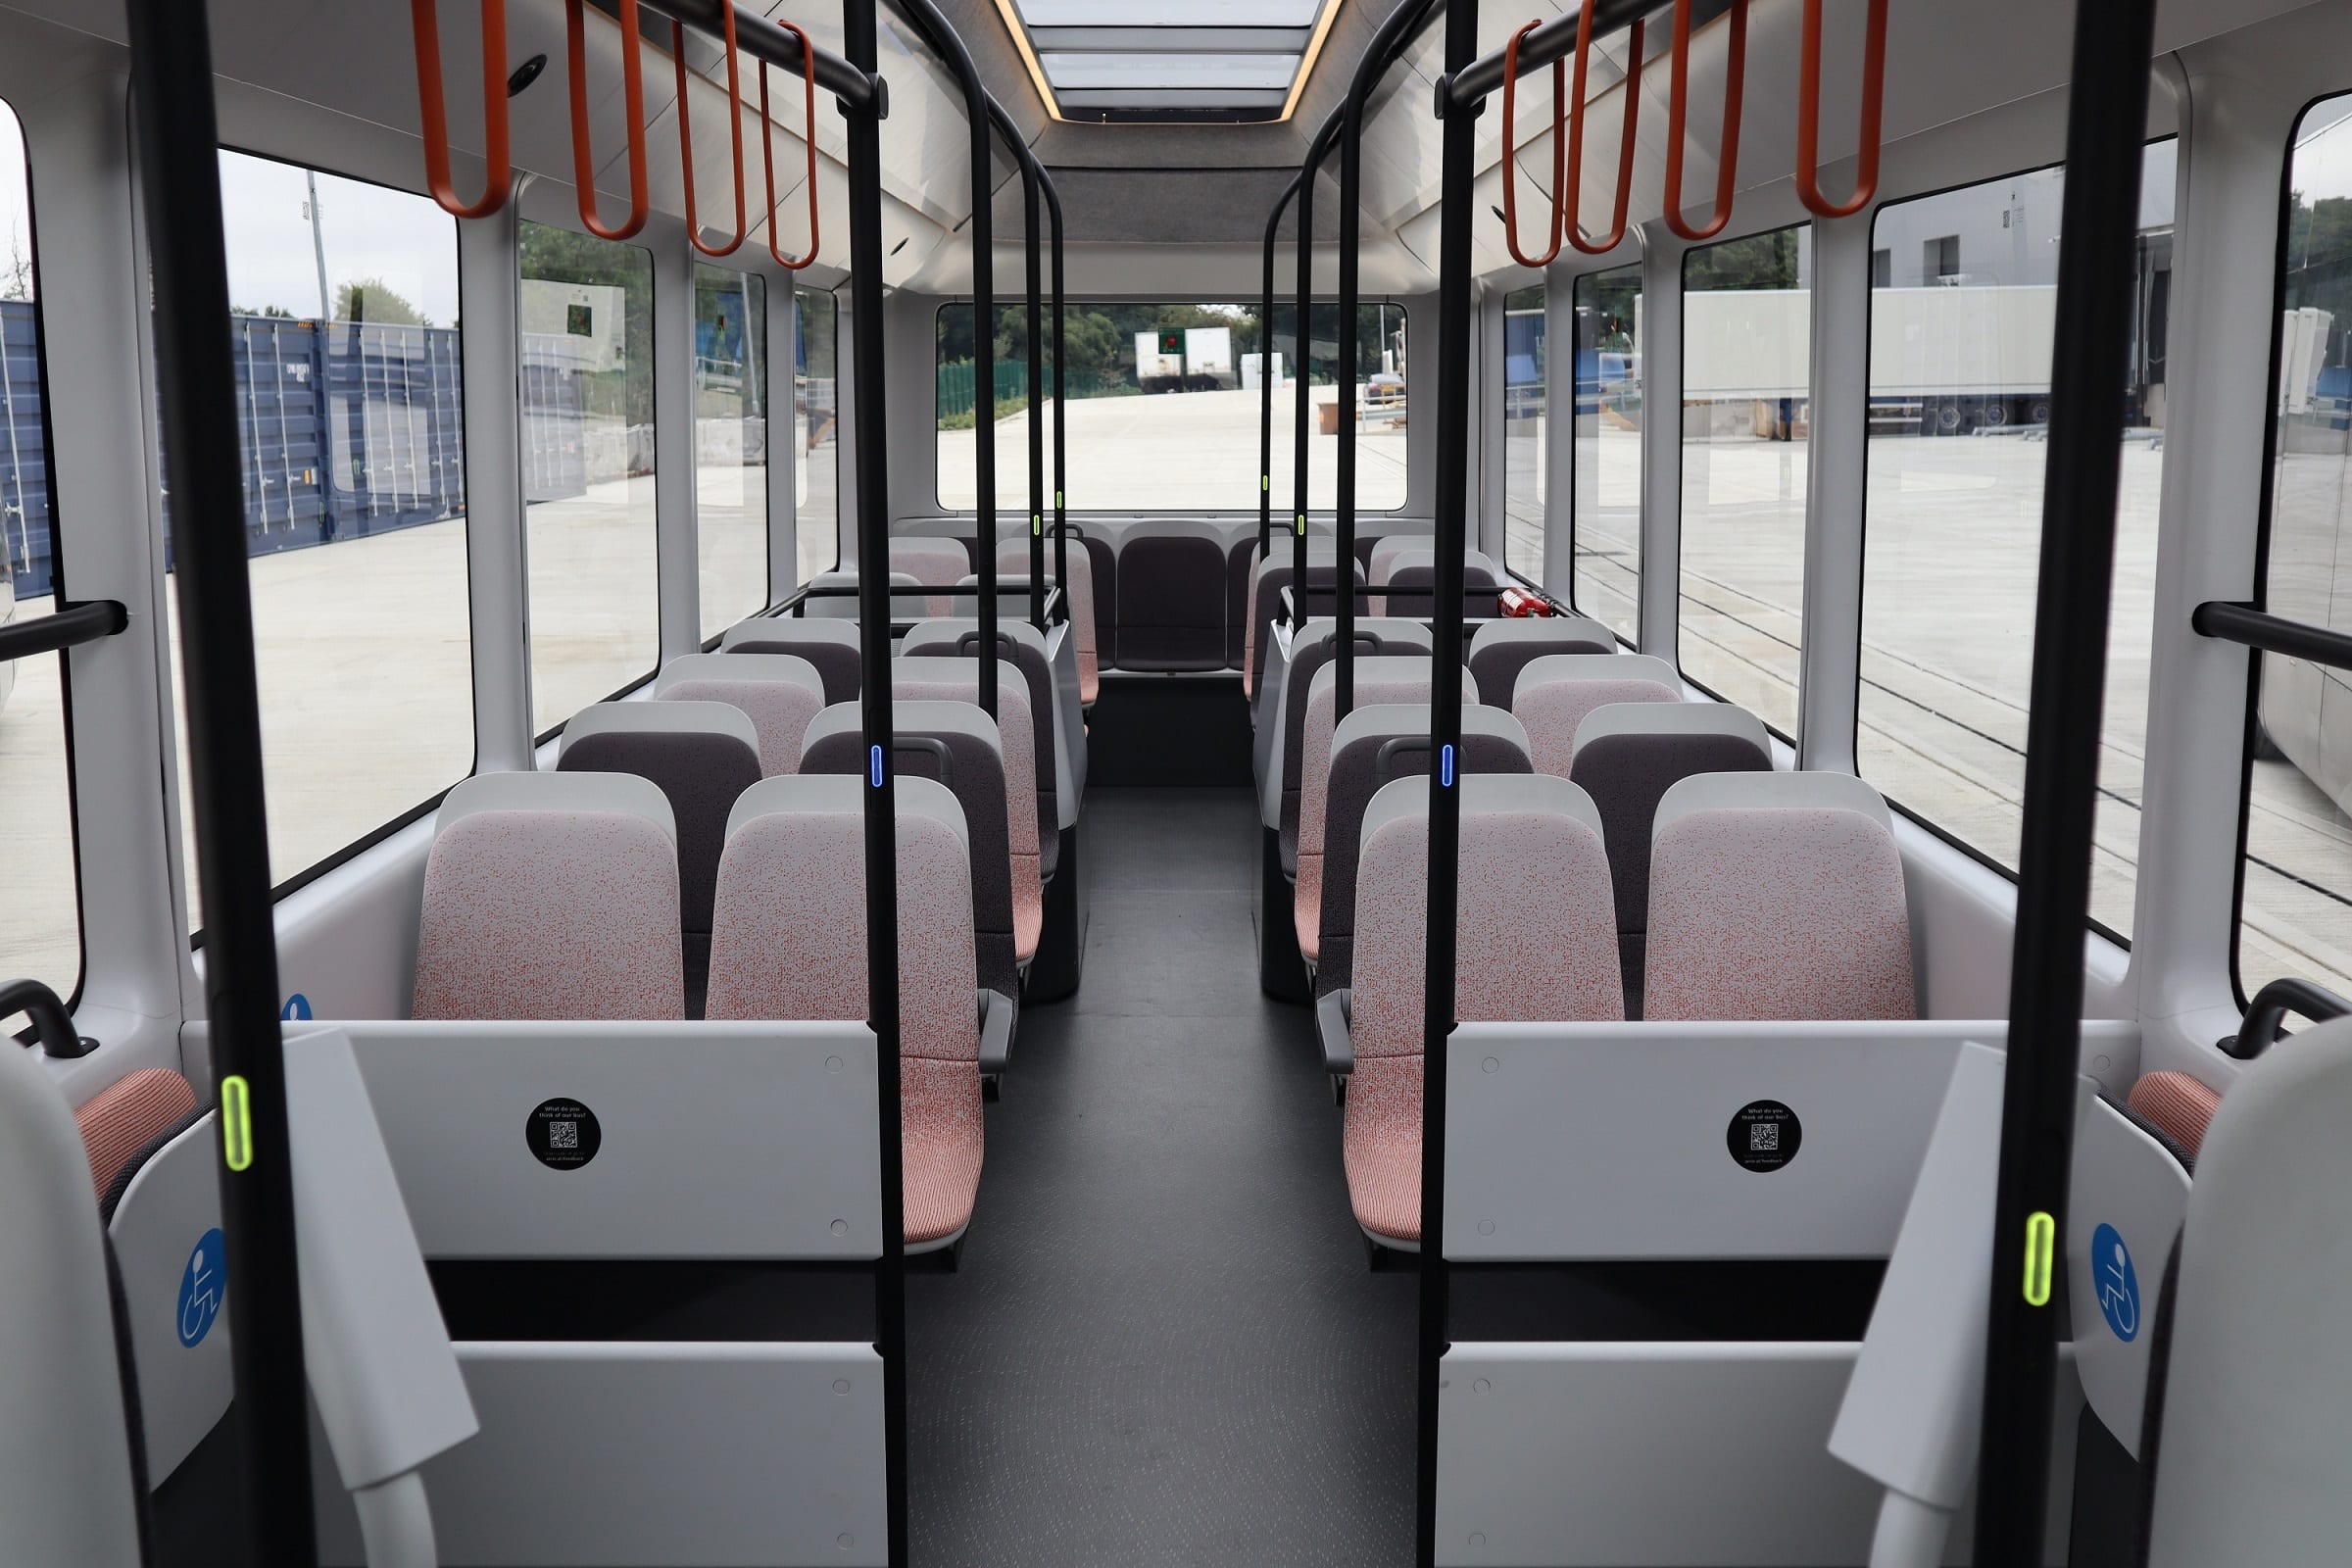 Arrival battery electric bus interior